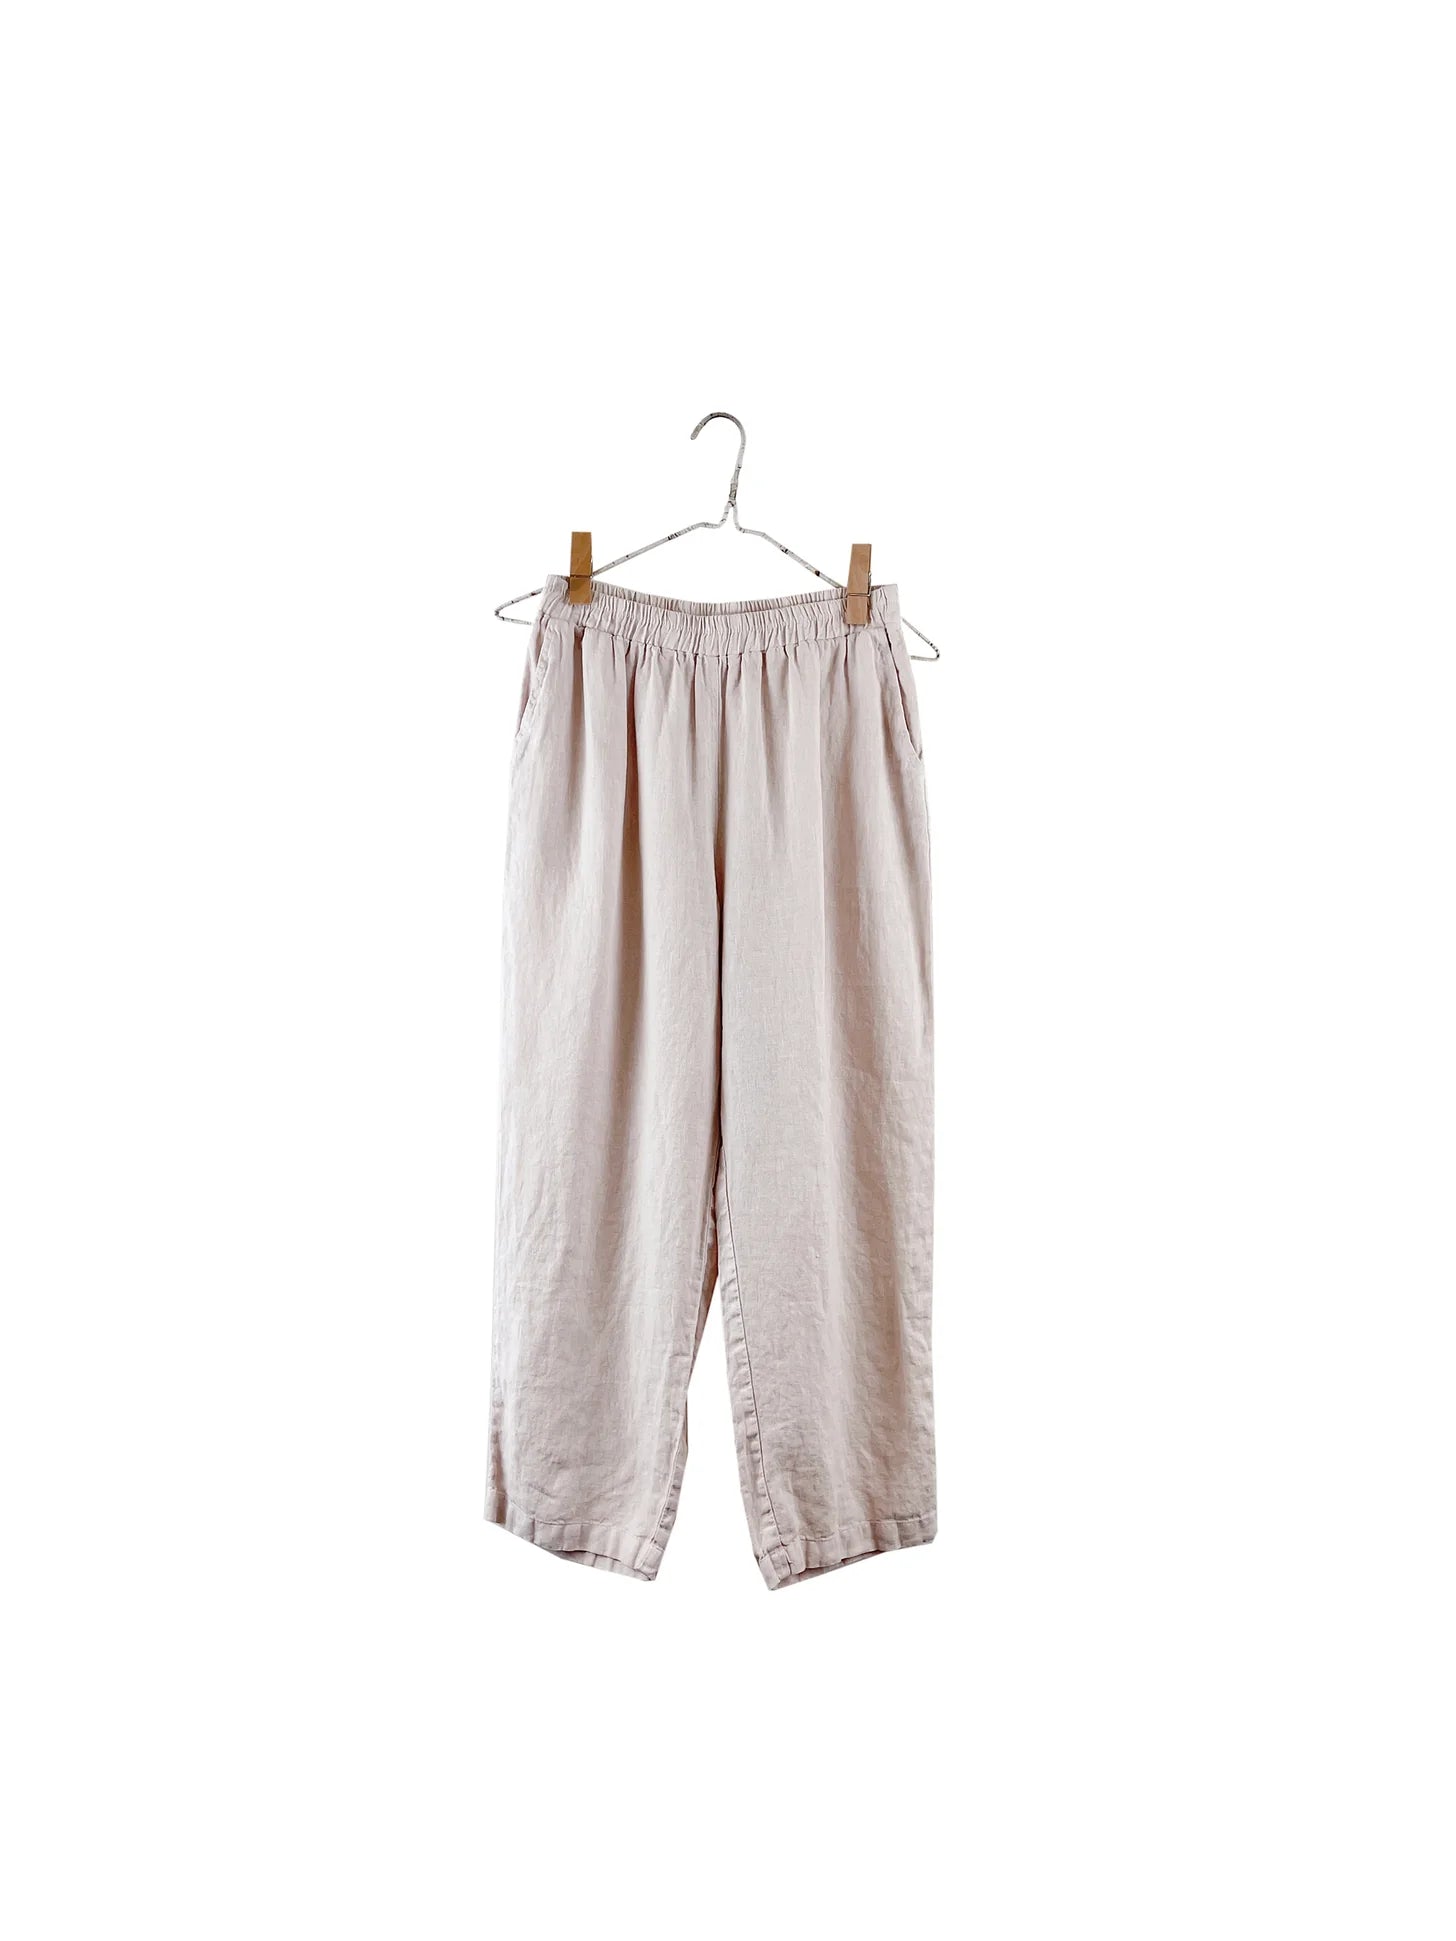 It is Well L.A - SS24 - Linen Pull On Pant in Natural - front display 2